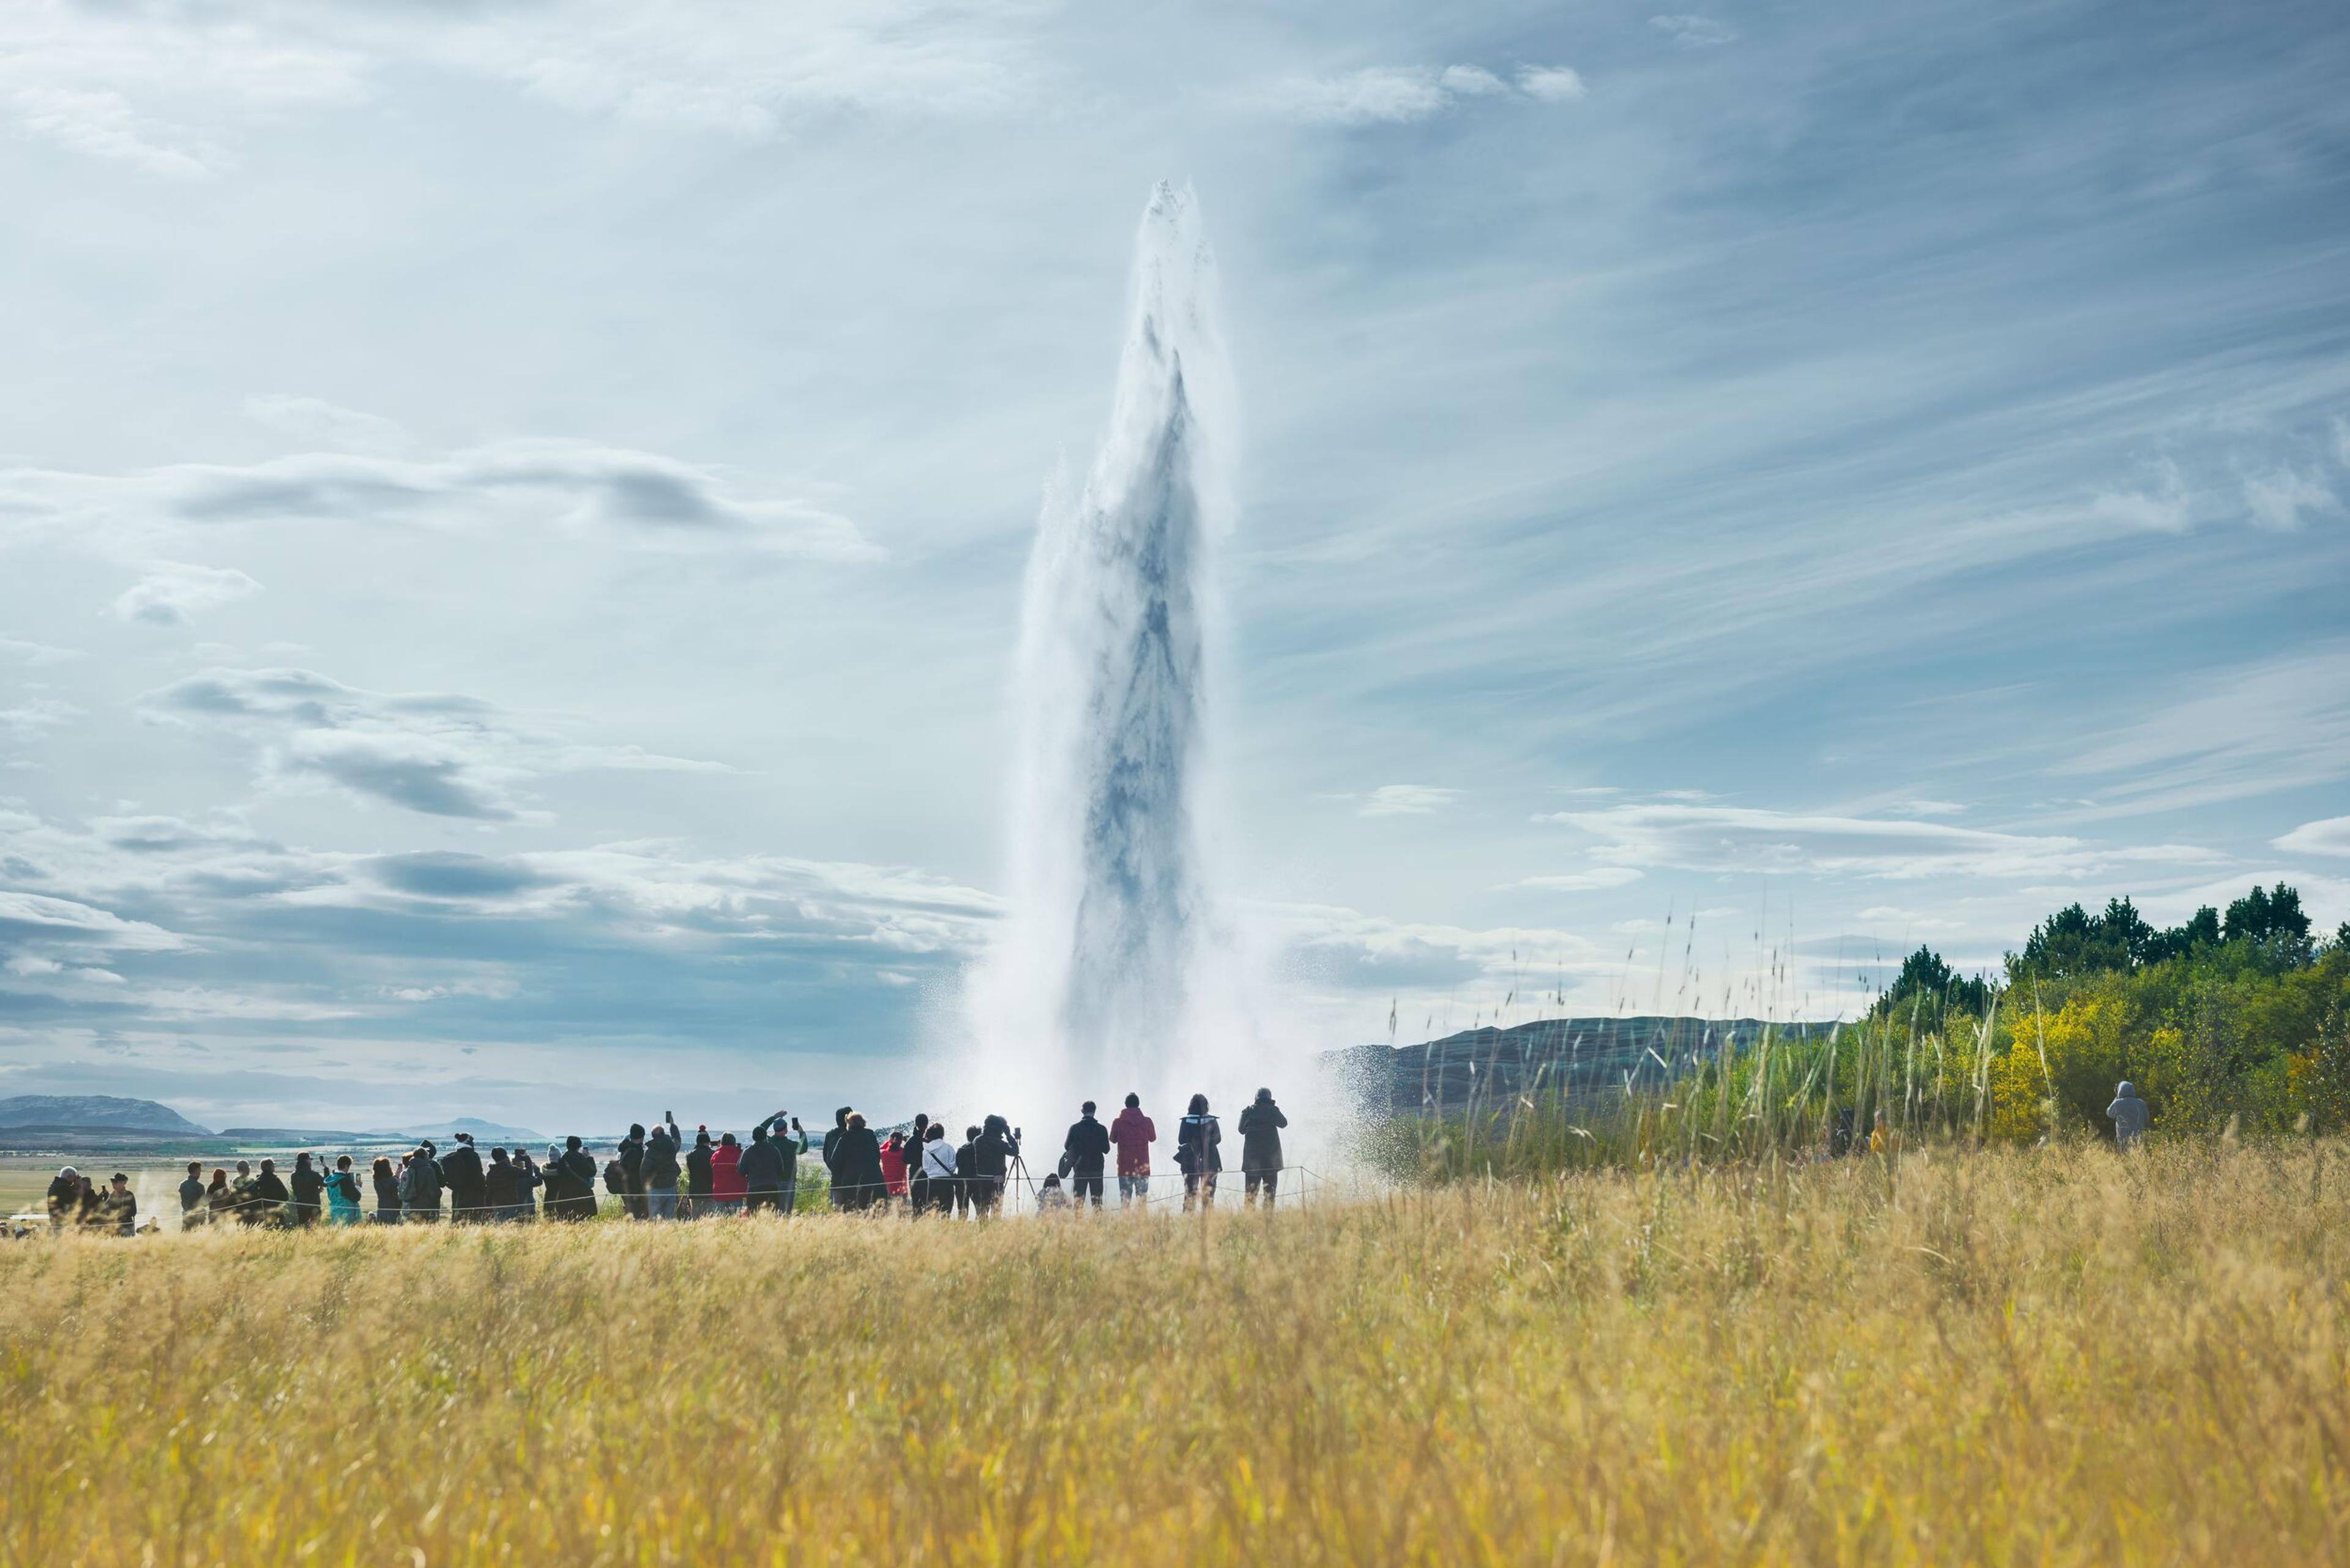 Geysir erupting in front of a group of tourists